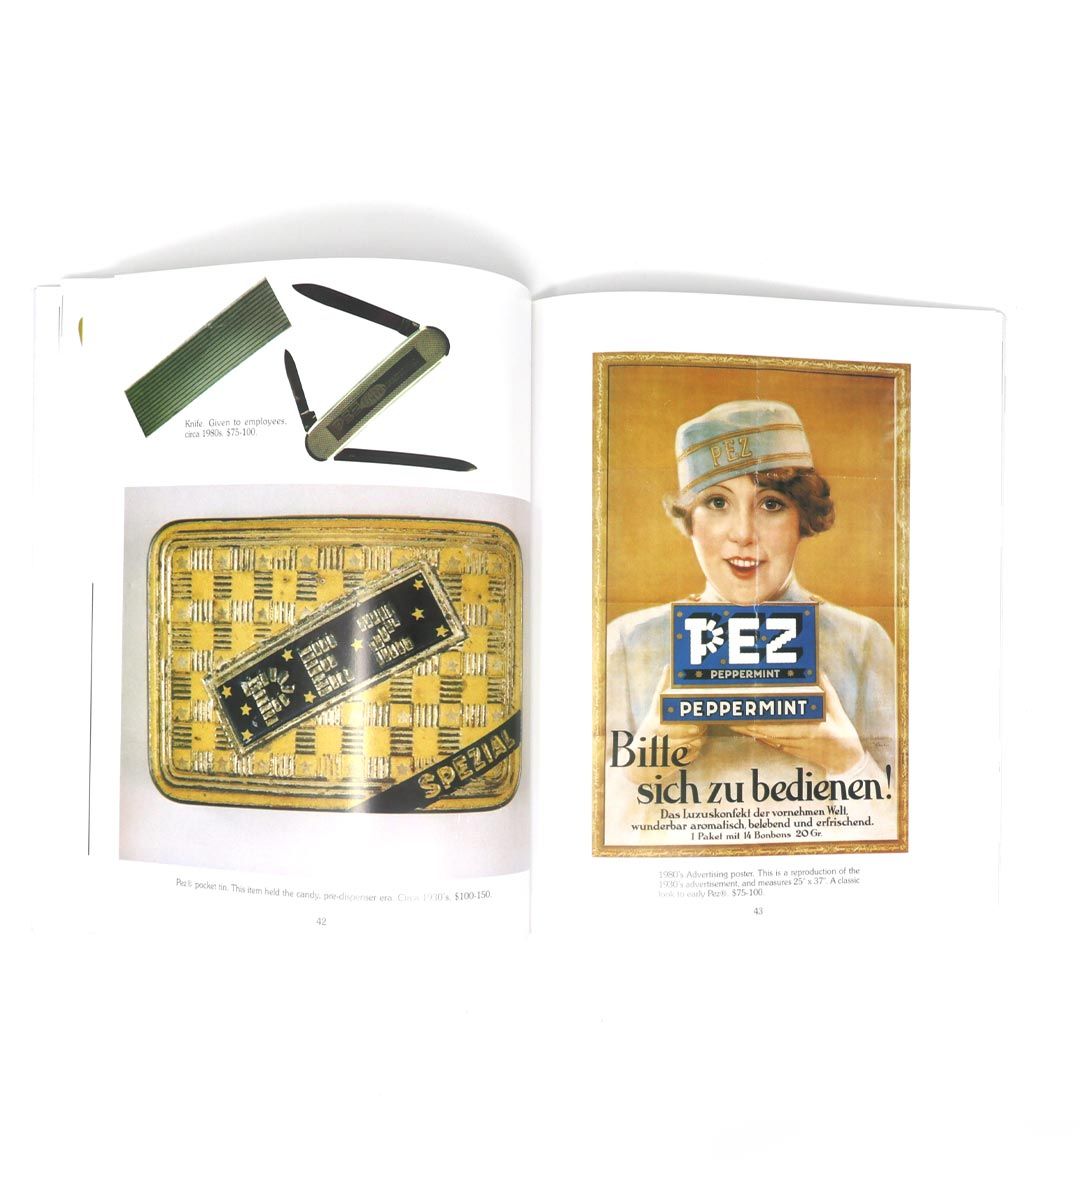 More Pez For Collectors - A Schiffer Book for Collectors